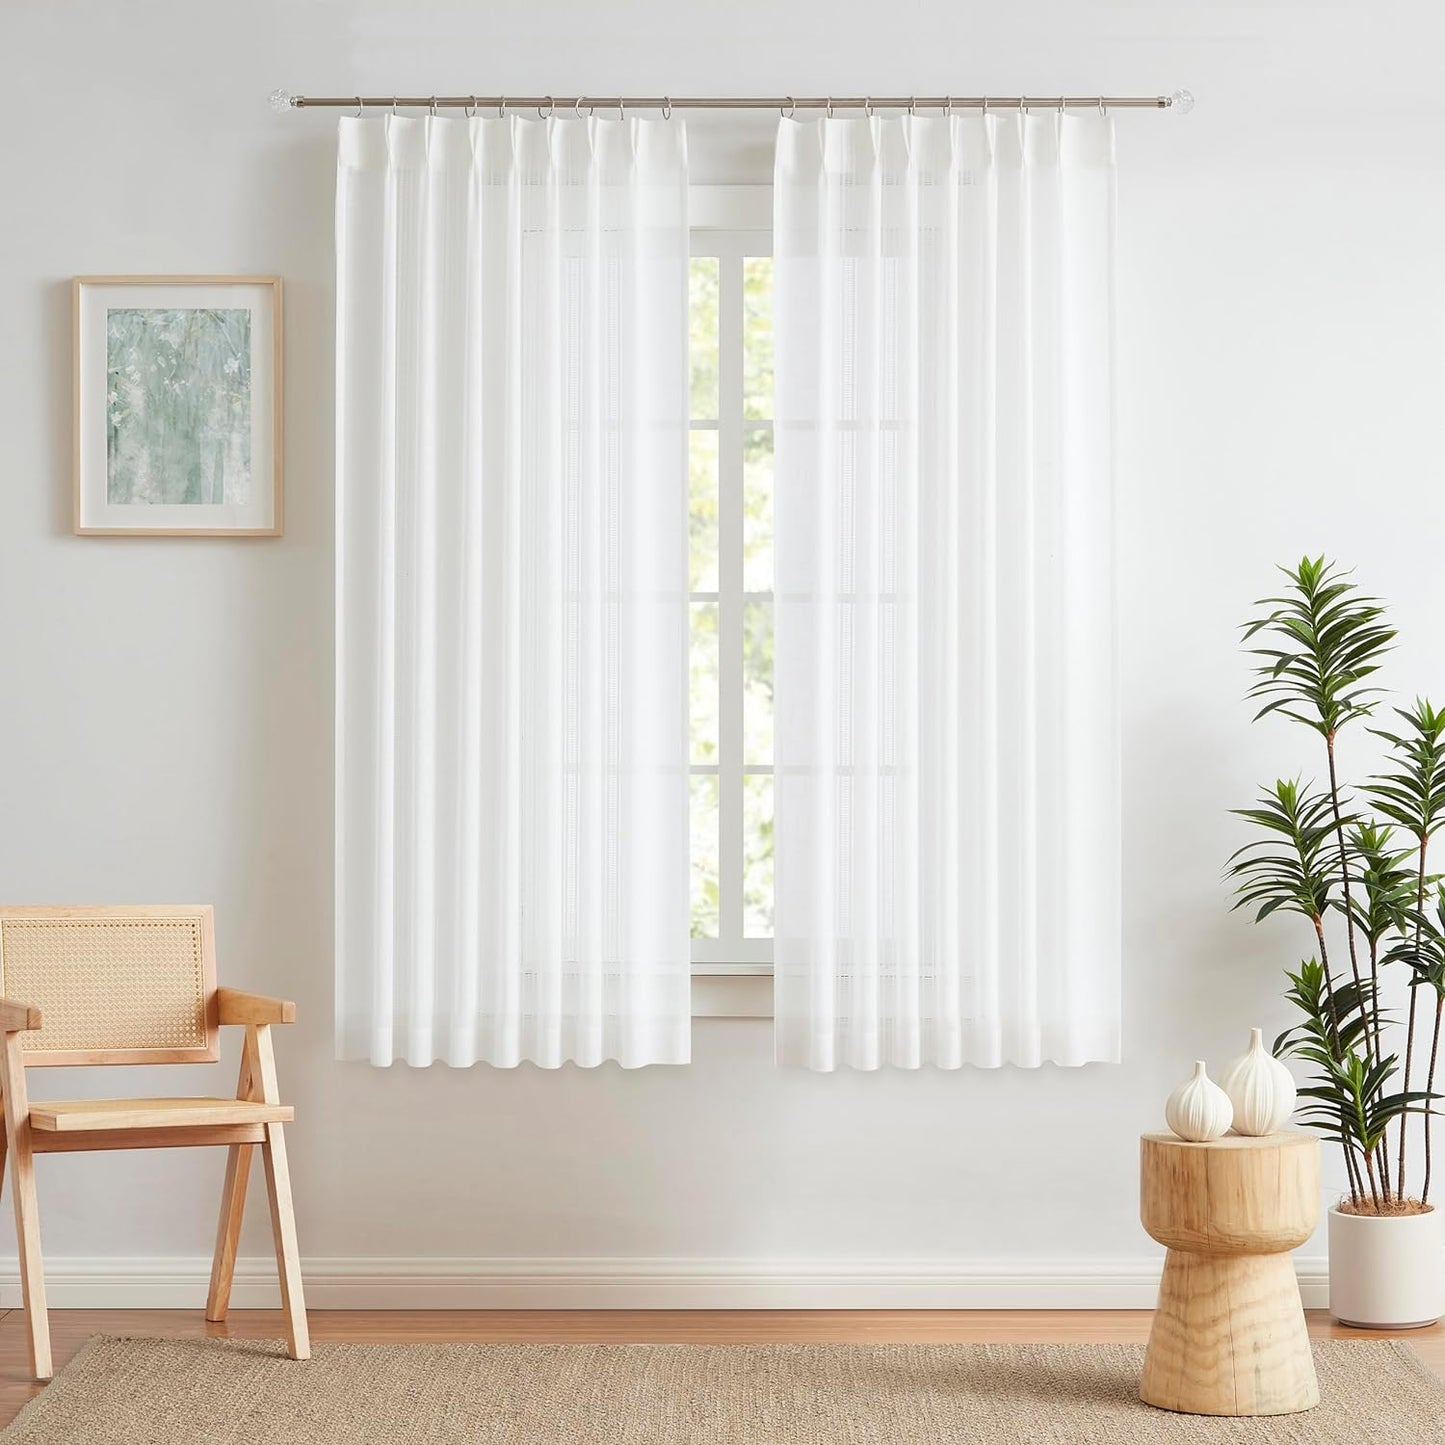 Kayne Studio Boho 2 Pages Sheer Pinch Pleated Curtains,Linen Blended 95 Inches Long Window Treatments,Light Filtering Pinch Pleat Drapes for Farmhouse Living Room 36" W X 90" L,18 Hooks,Beige  Kayne Studio White 36"X63"X2 